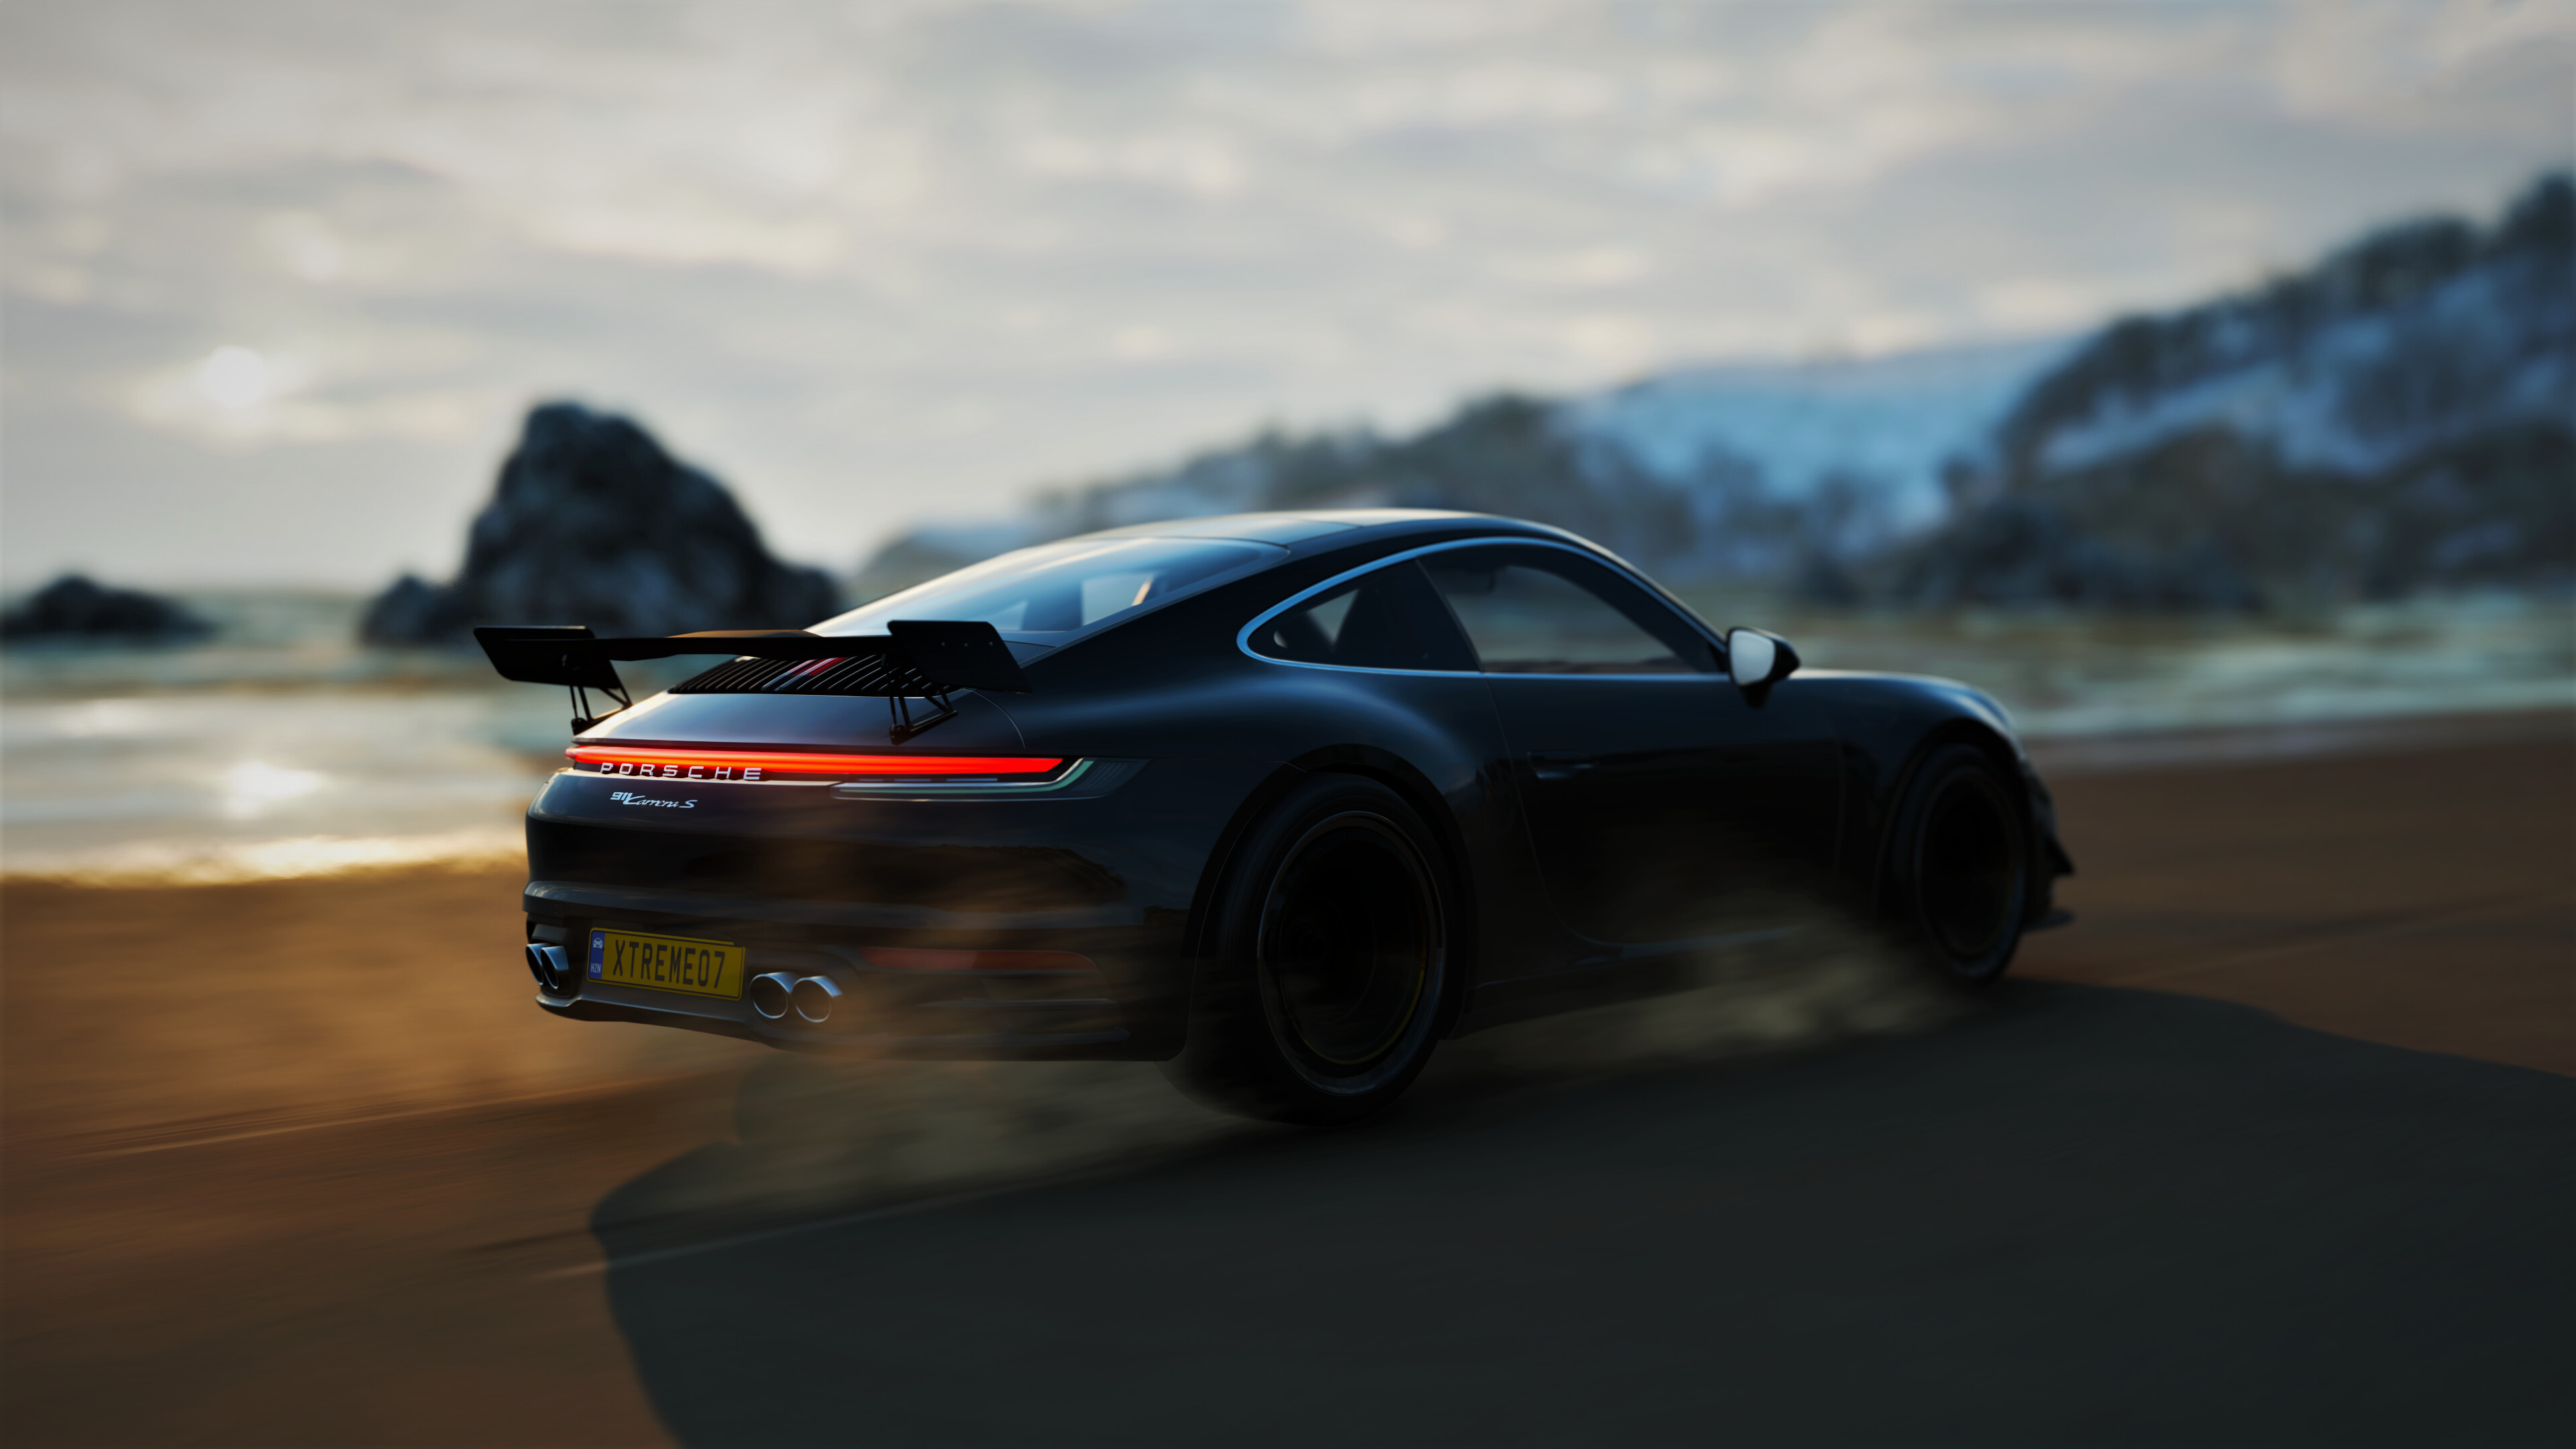 Porsche: The 911 has been raced extensively by private and factory teams, in a variety of classes, It is among the most successful competition cars. 3840x2160 4K Background.